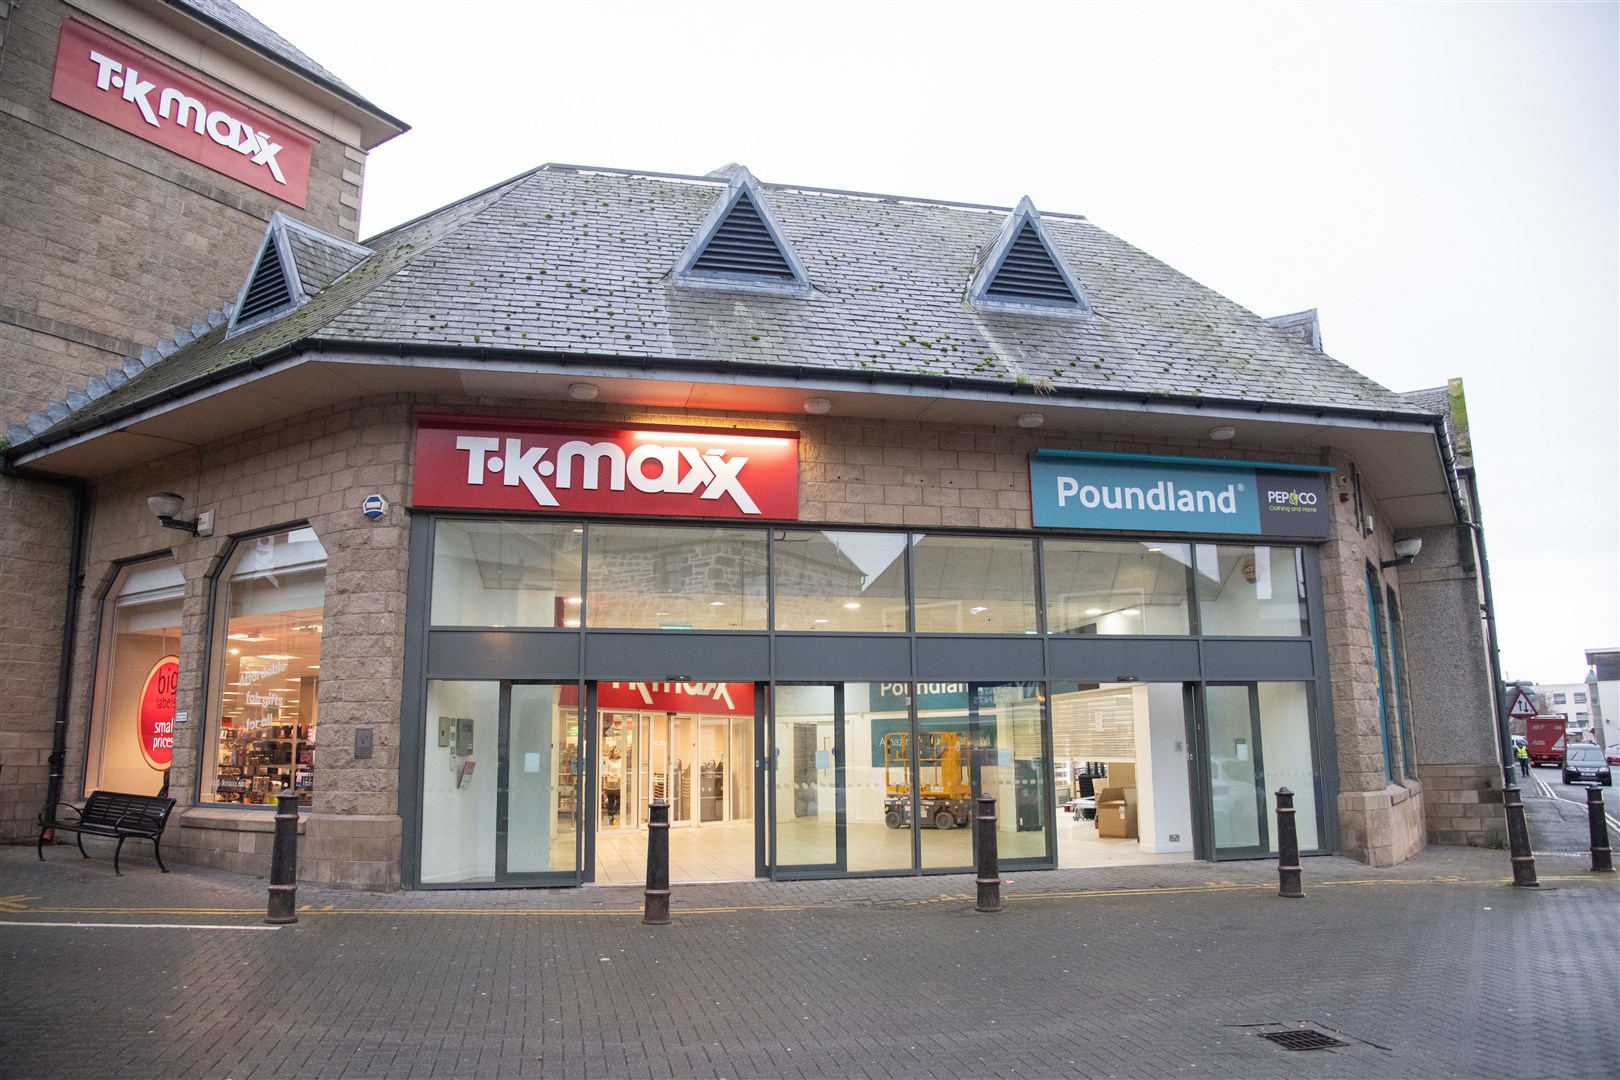 Poundland in Elgin has moved next door to TX Maxx. Picture: Daniel Forsyth